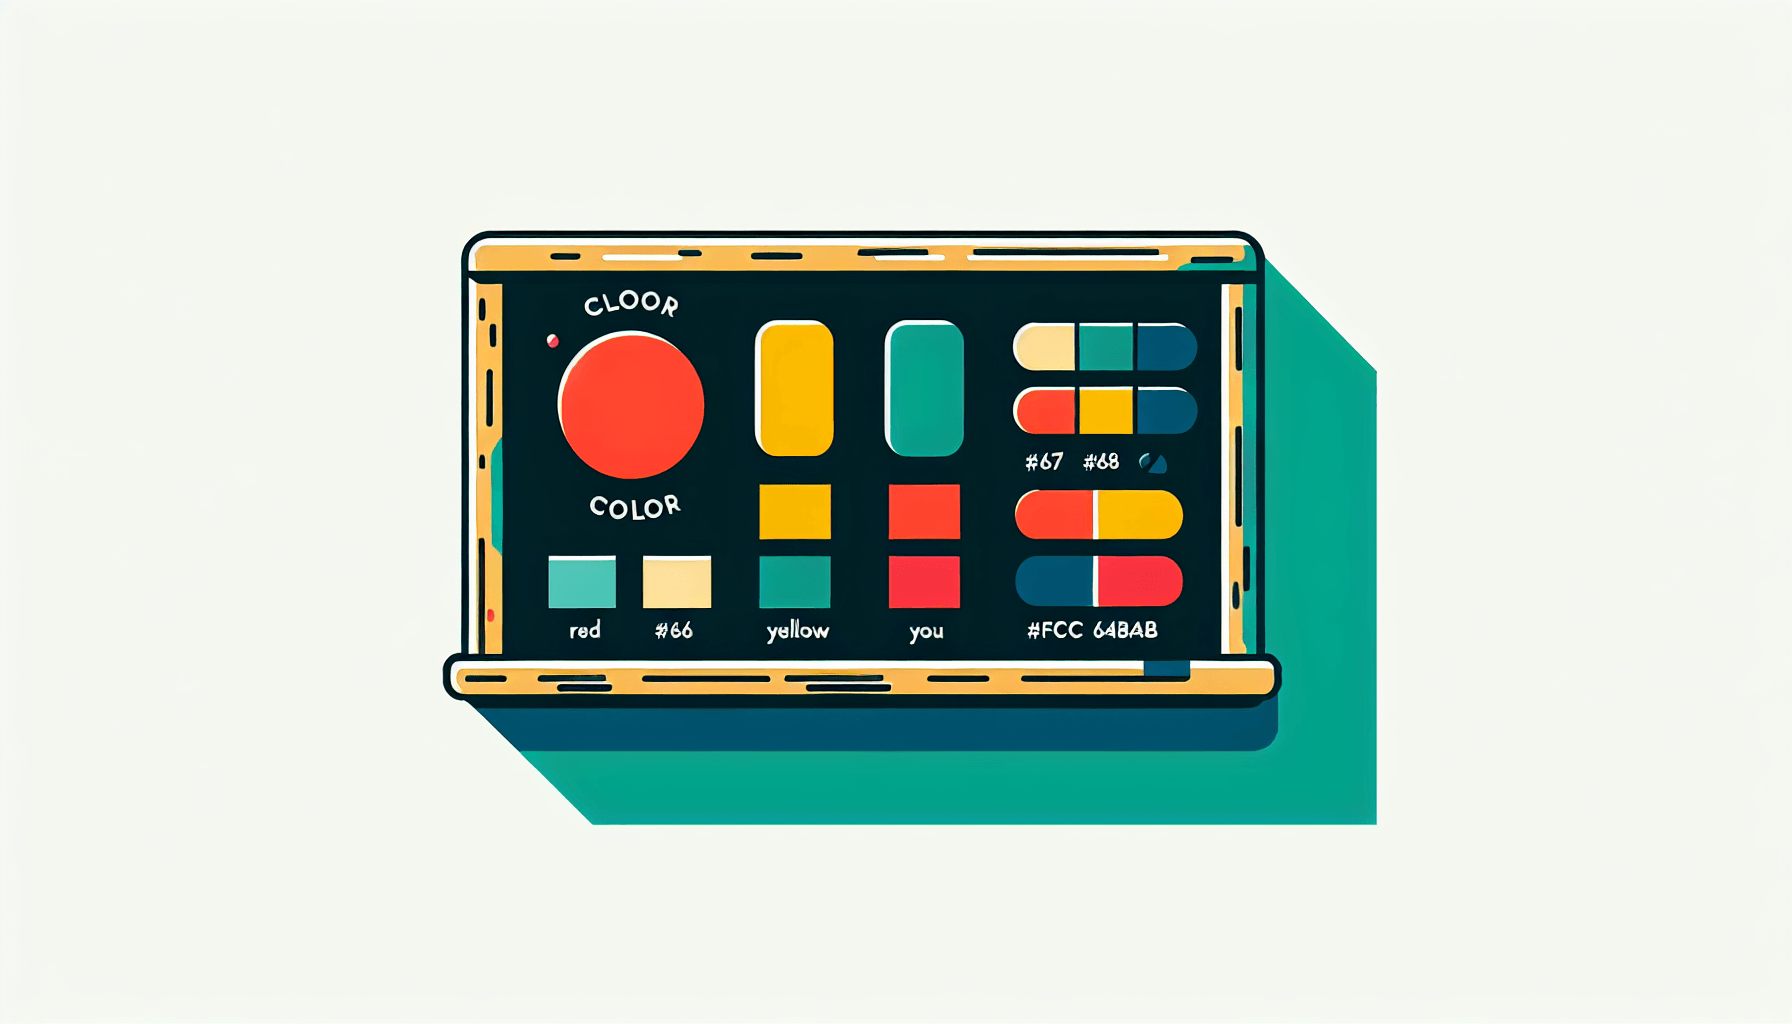 Chalkboard in flat illustration style and white background, red #f47574, green #88c7a8, yellow #fcc44b, and blue #645bc8 colors.